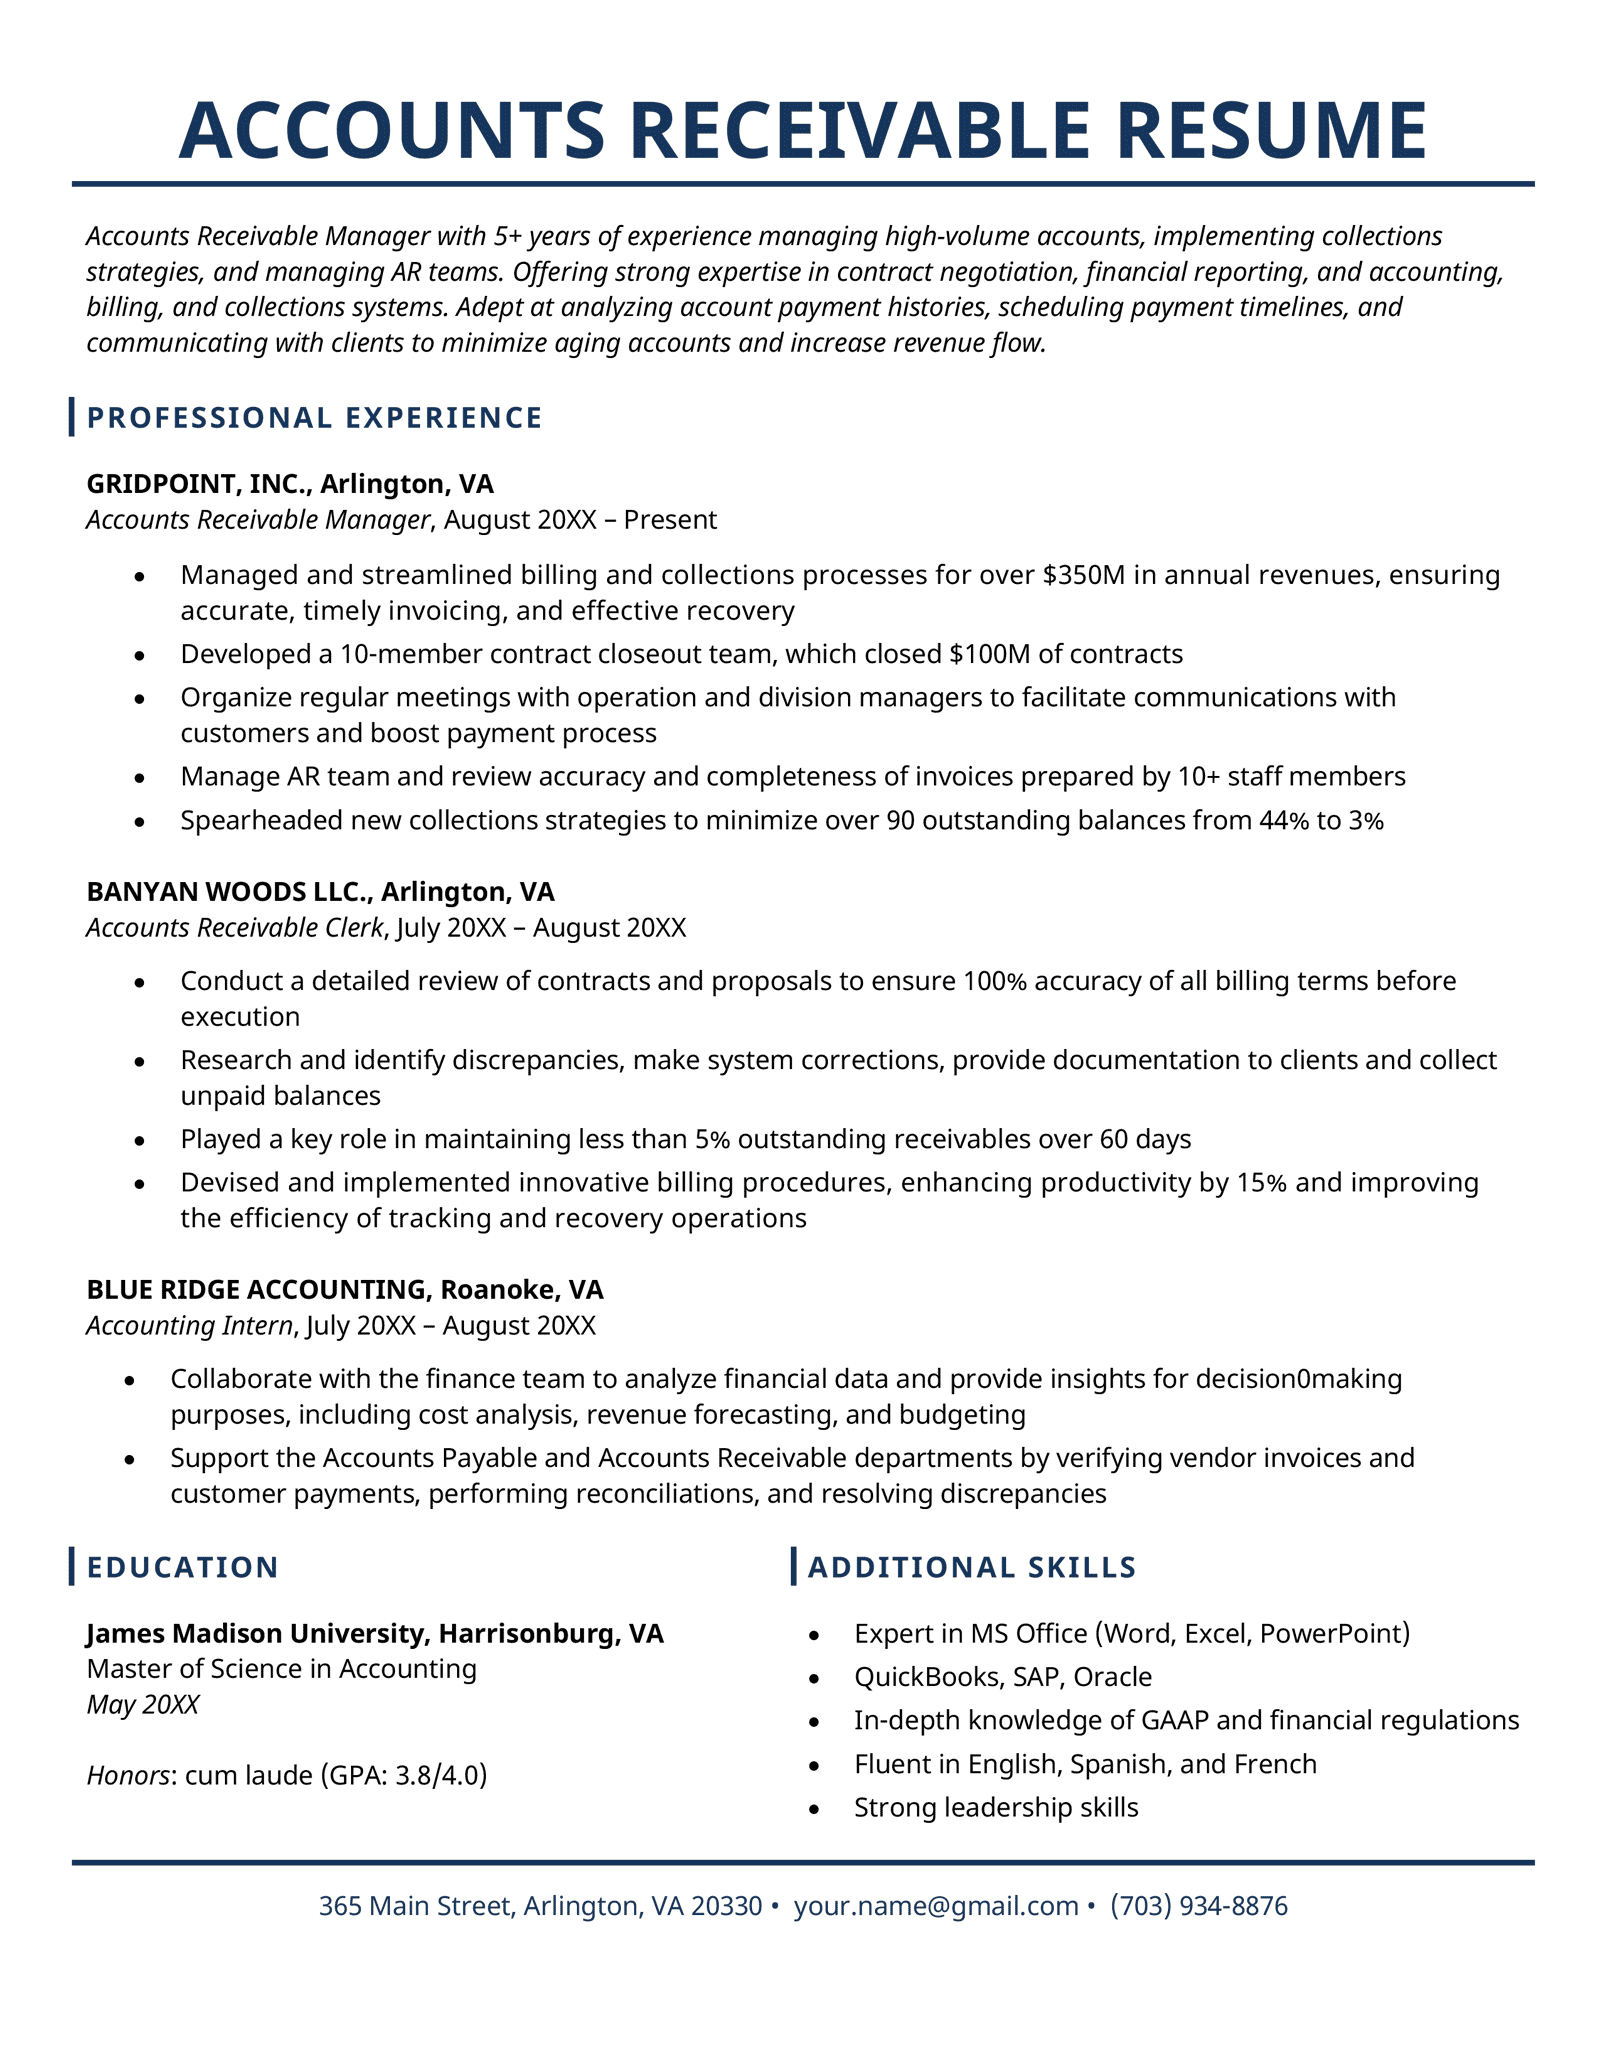 Example of an accounts receivable resume using a traditional resume with dark blue headings.